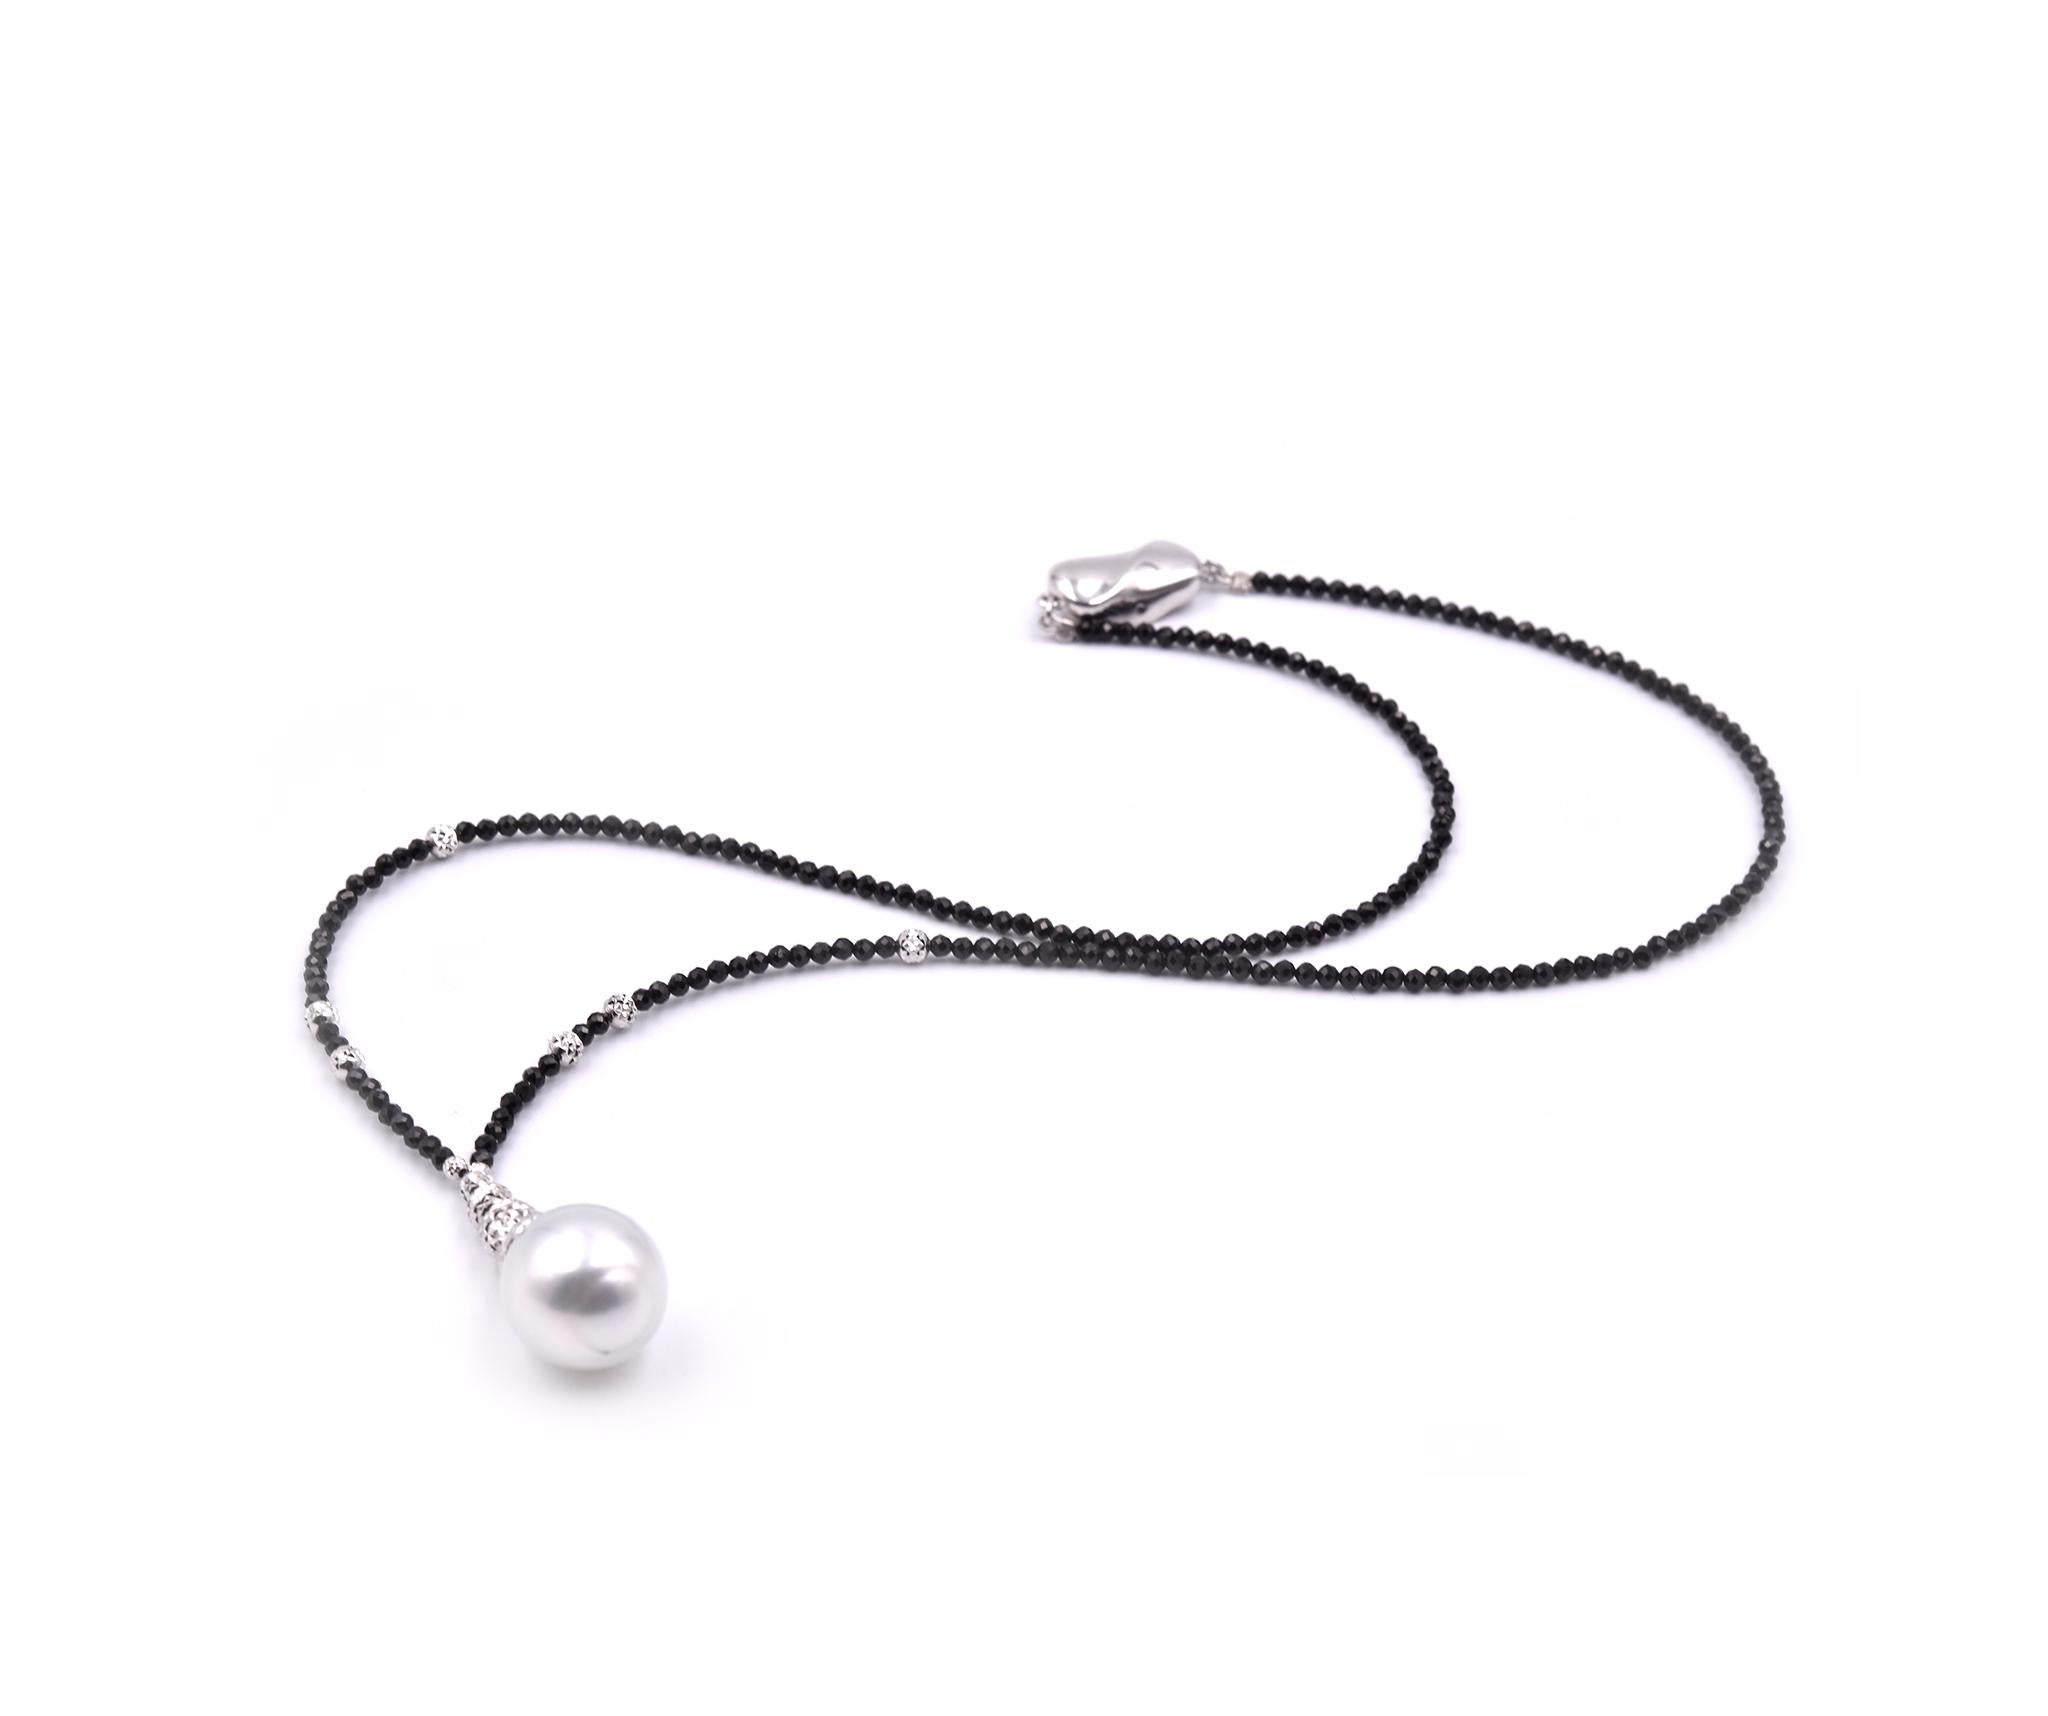 Designer: custom design
Material: sterling silver, black spinel
South Sea Pearl: 1 South Sea Pearl with diameter of 10.07mm
Dimensions: necklace is 18” long
Weight: 7.90 grams
